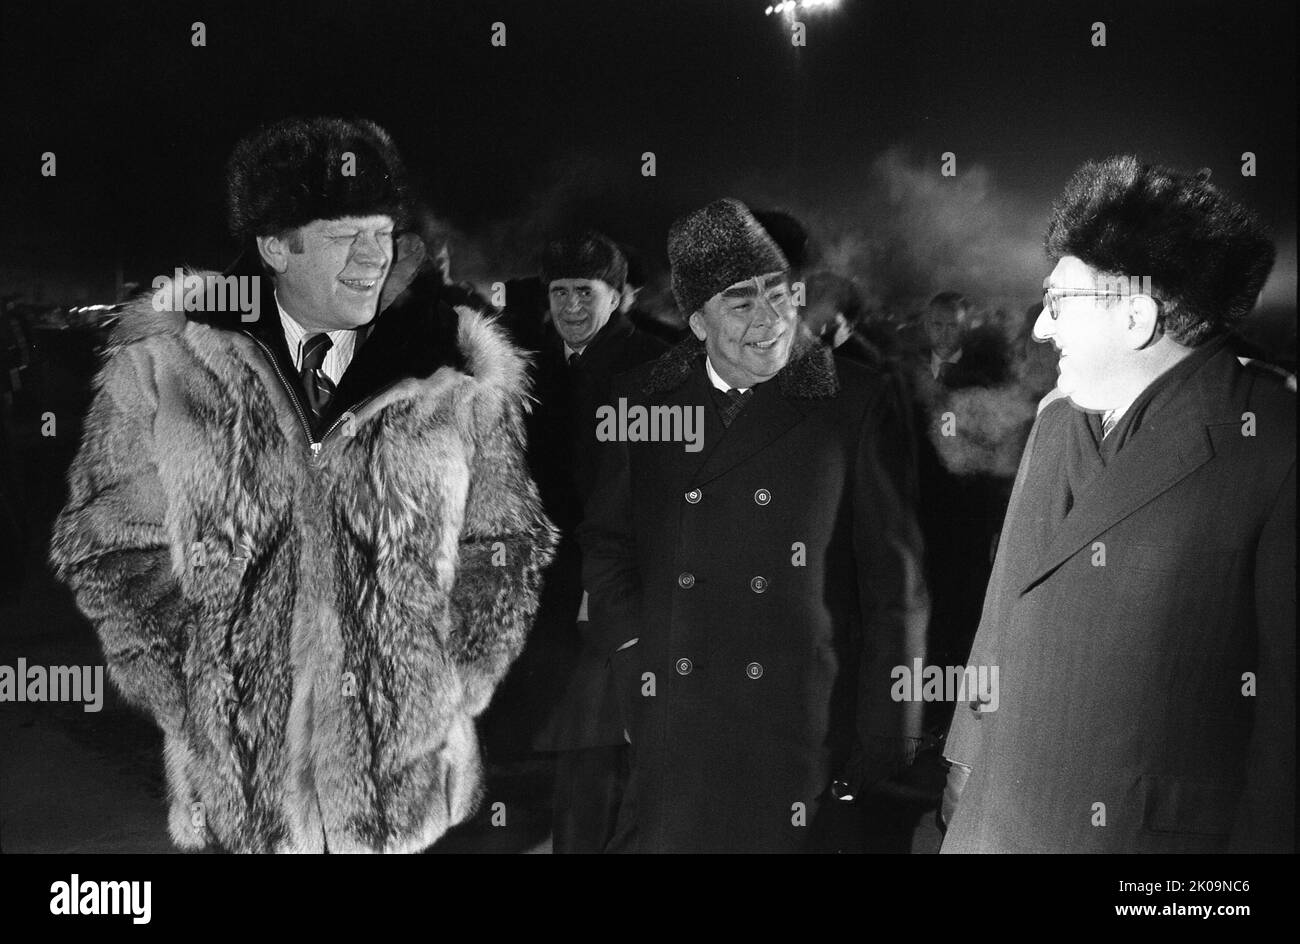 President Gerald Ford, General Secretary Lenoid Brezhnev, and Henry Kissinger speaking informally at the conclusion of the Vladivostok Summit on the tarmac at Vozdvizhenka Airport. Just moments after this photo was taken, President Ford informally concluded the Vladivostok Summit by giving his wolfskin coat to Secretary Brezhnev. 1974. Stock Photo